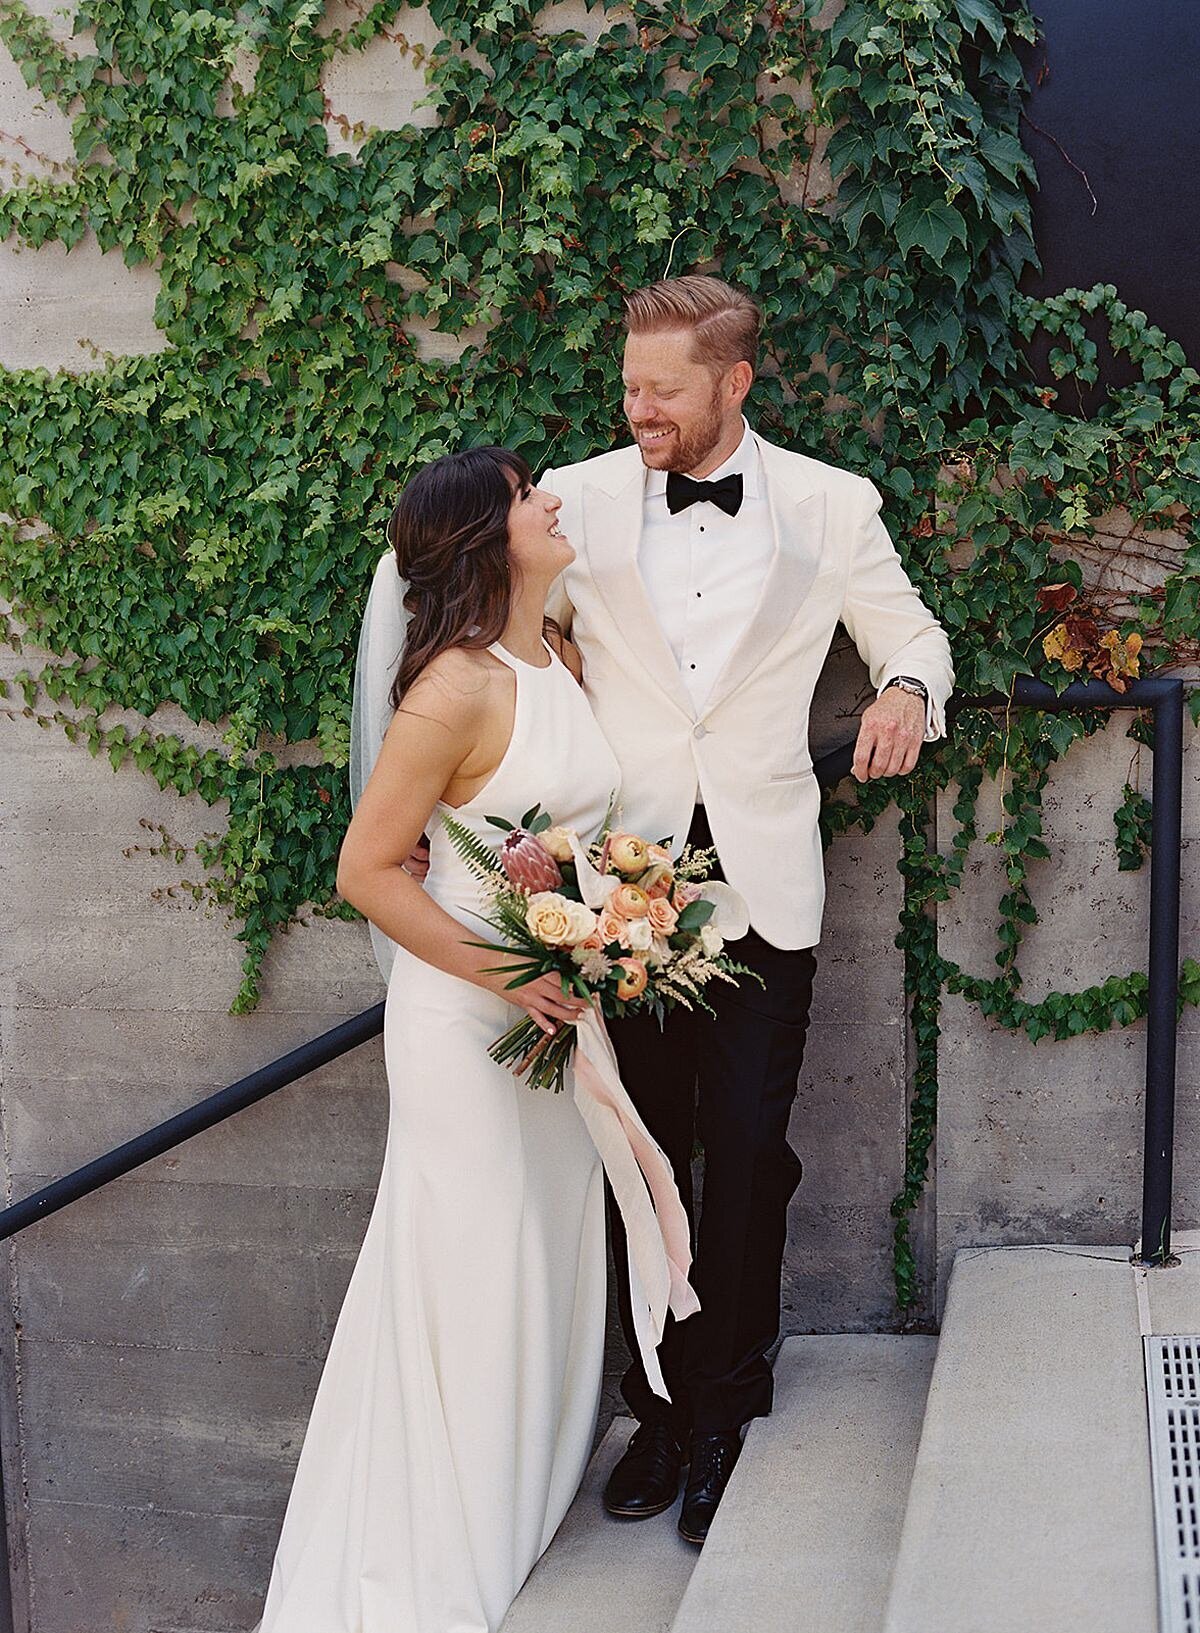 The bride, wearing a silk sheath halter top wedding dress and veil, holding a large bouquet of pink, peach, blush, ivory and white flowers with ferns and palm fronts as she smiles up at the groom who is wearing a tuxedo with a white jacket . The bride and groom are lounging in the ivy covered courtyard of Clementine Hall against a soft gray wall.